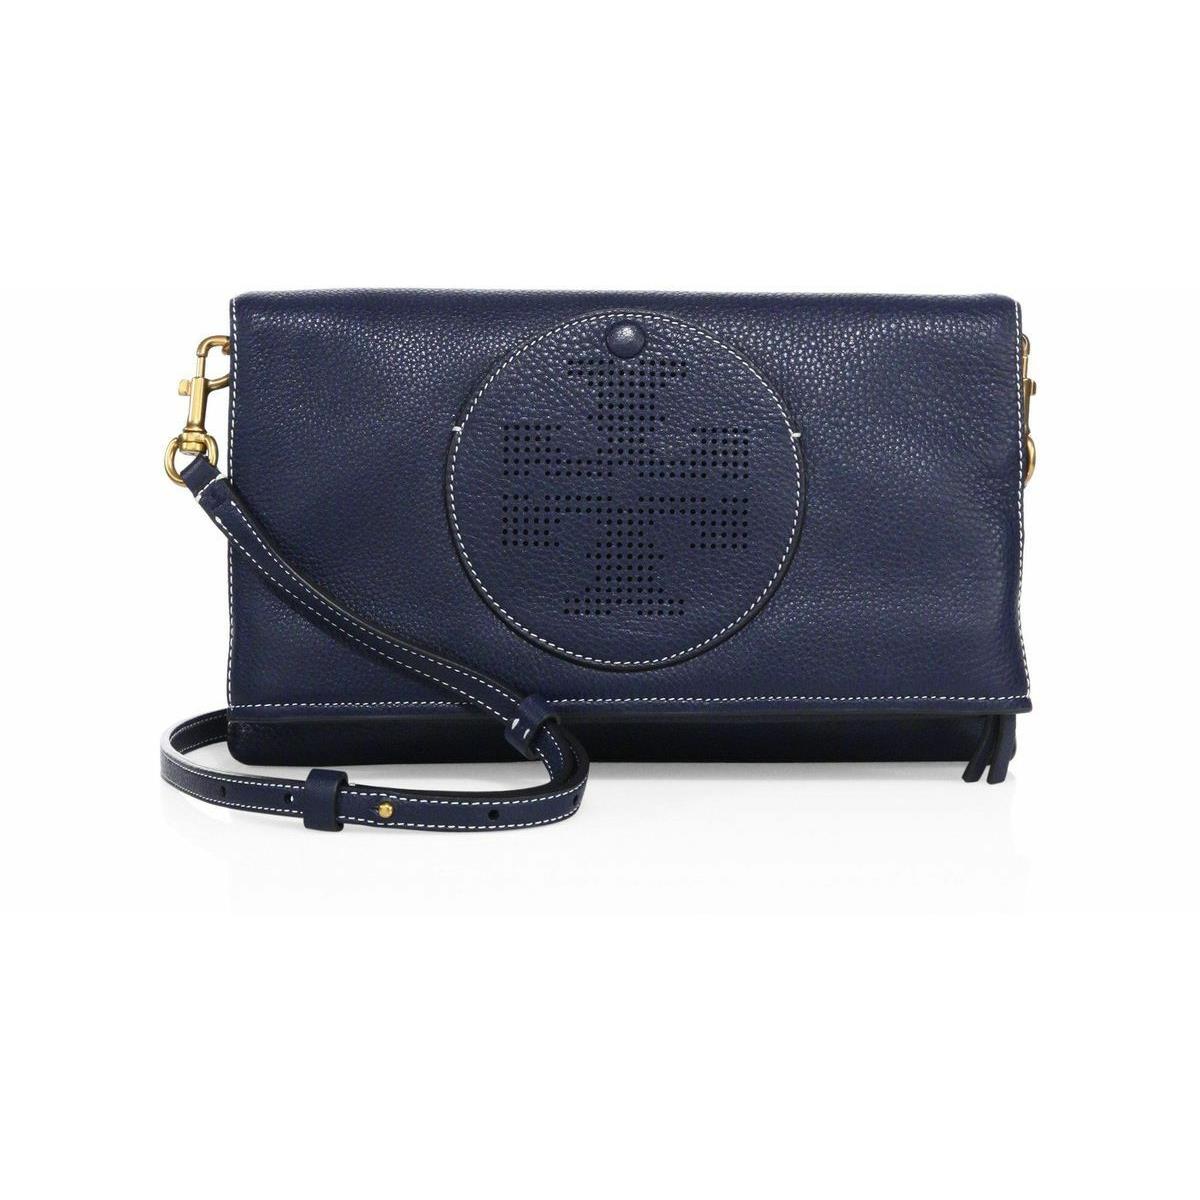 Tory Burch Women Perforated Logo Fold-over Leather Crossbody Bag Royal Navy